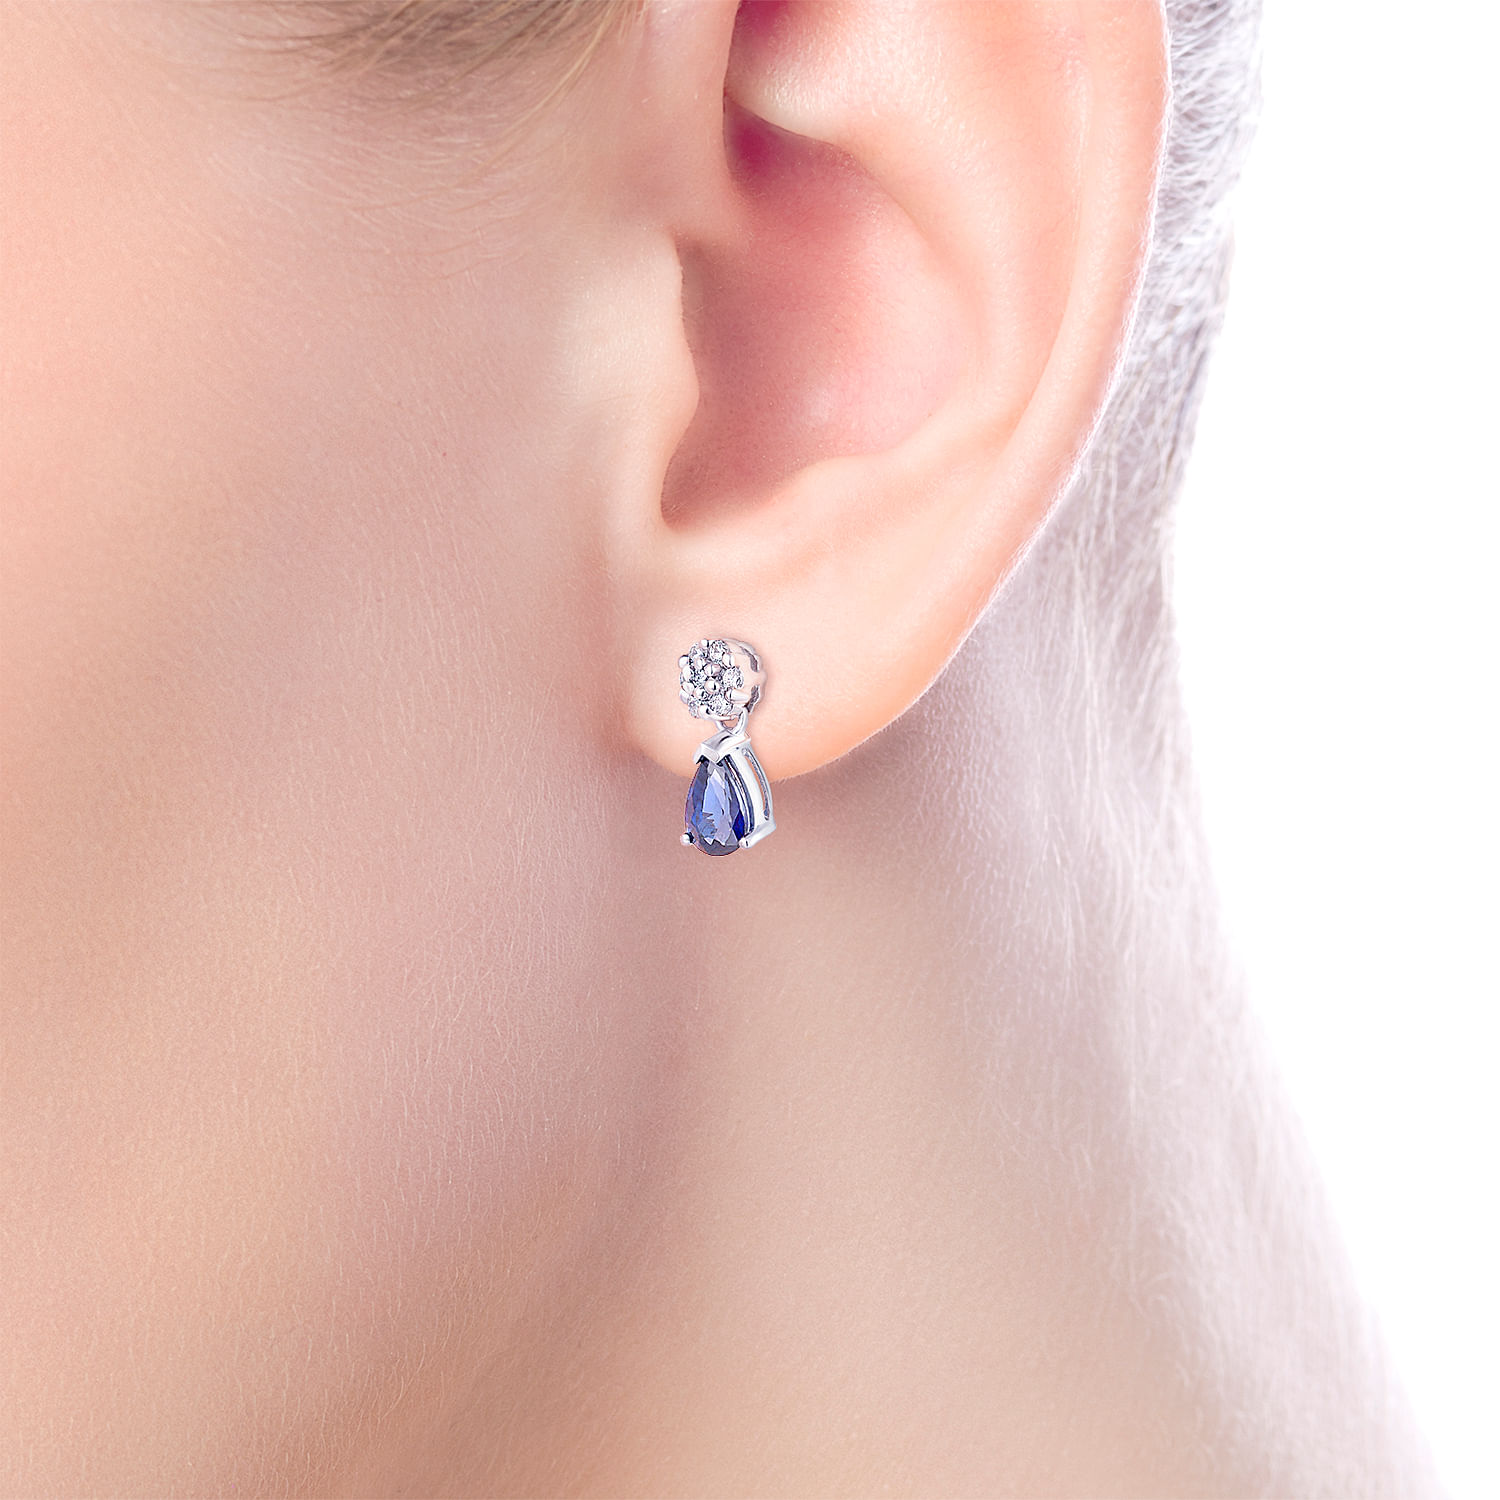 14K White Gold Floral Diamond Stud Earrings with Pear Shaped Sapphire Drops - 0.14 ct - Shot 2